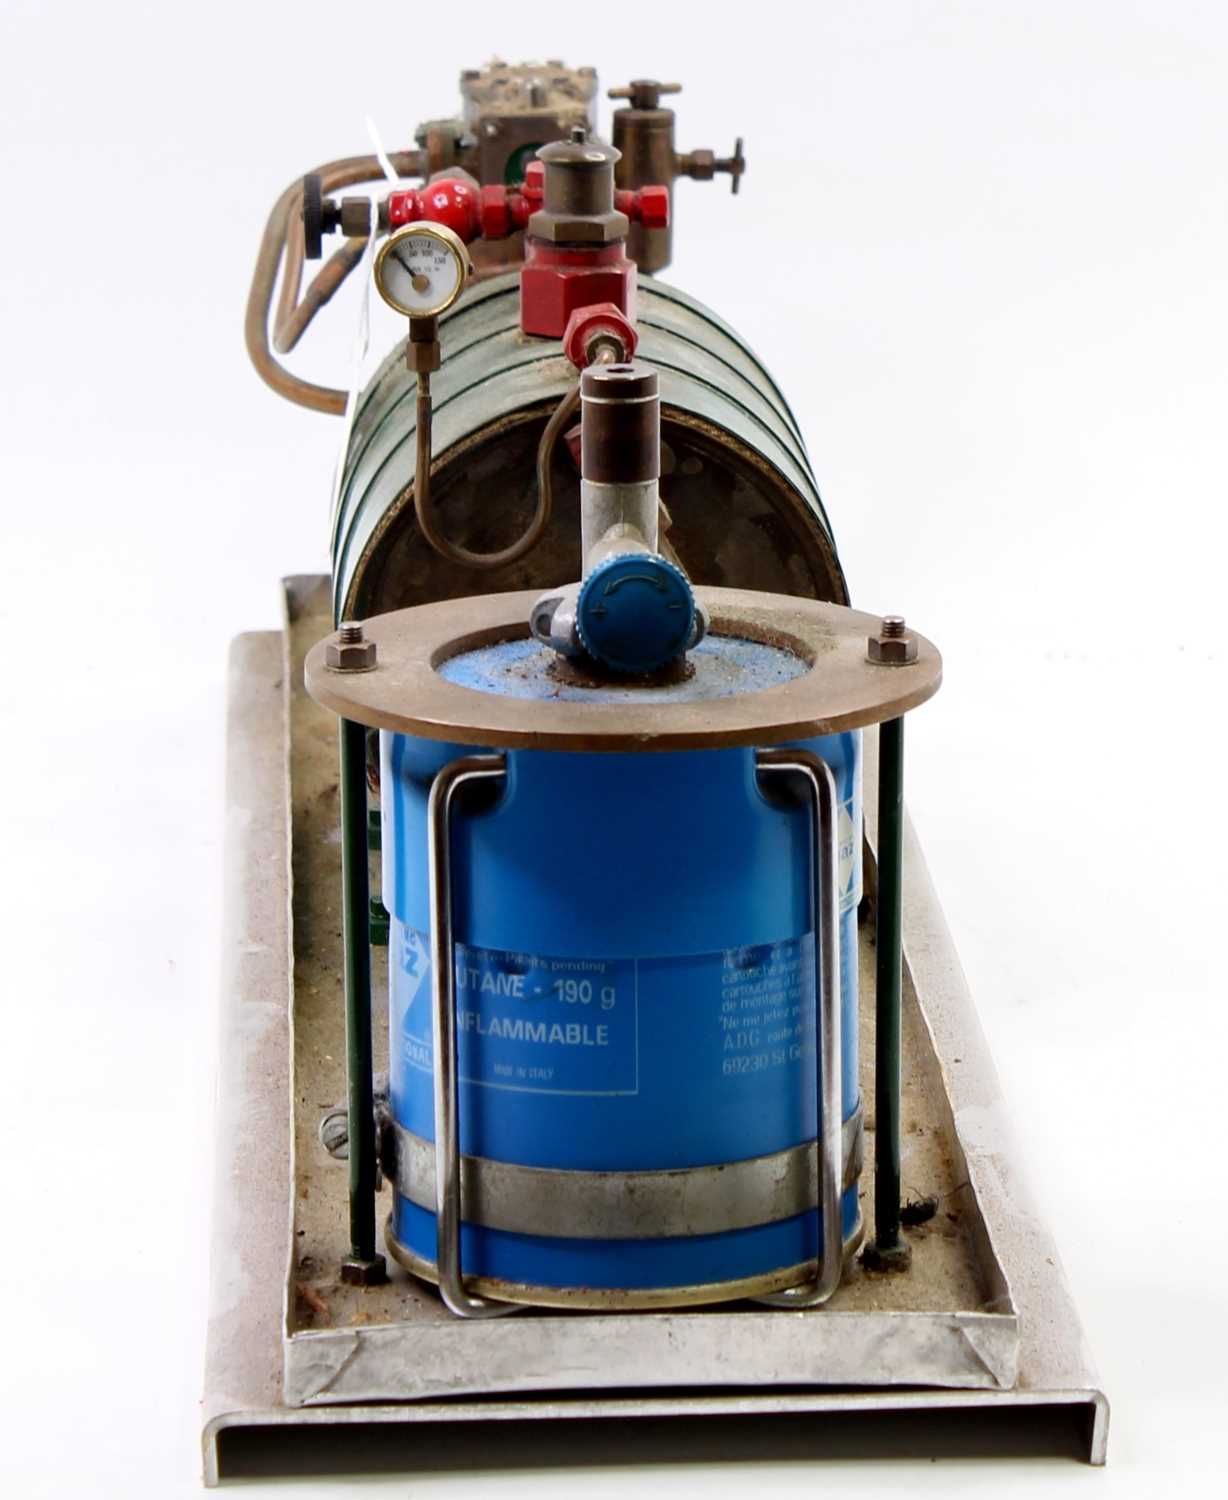 Scratchbuilt stationary steam plant comprising of the horizontal gas-fired boiler, powering a - Bild 2 aus 4